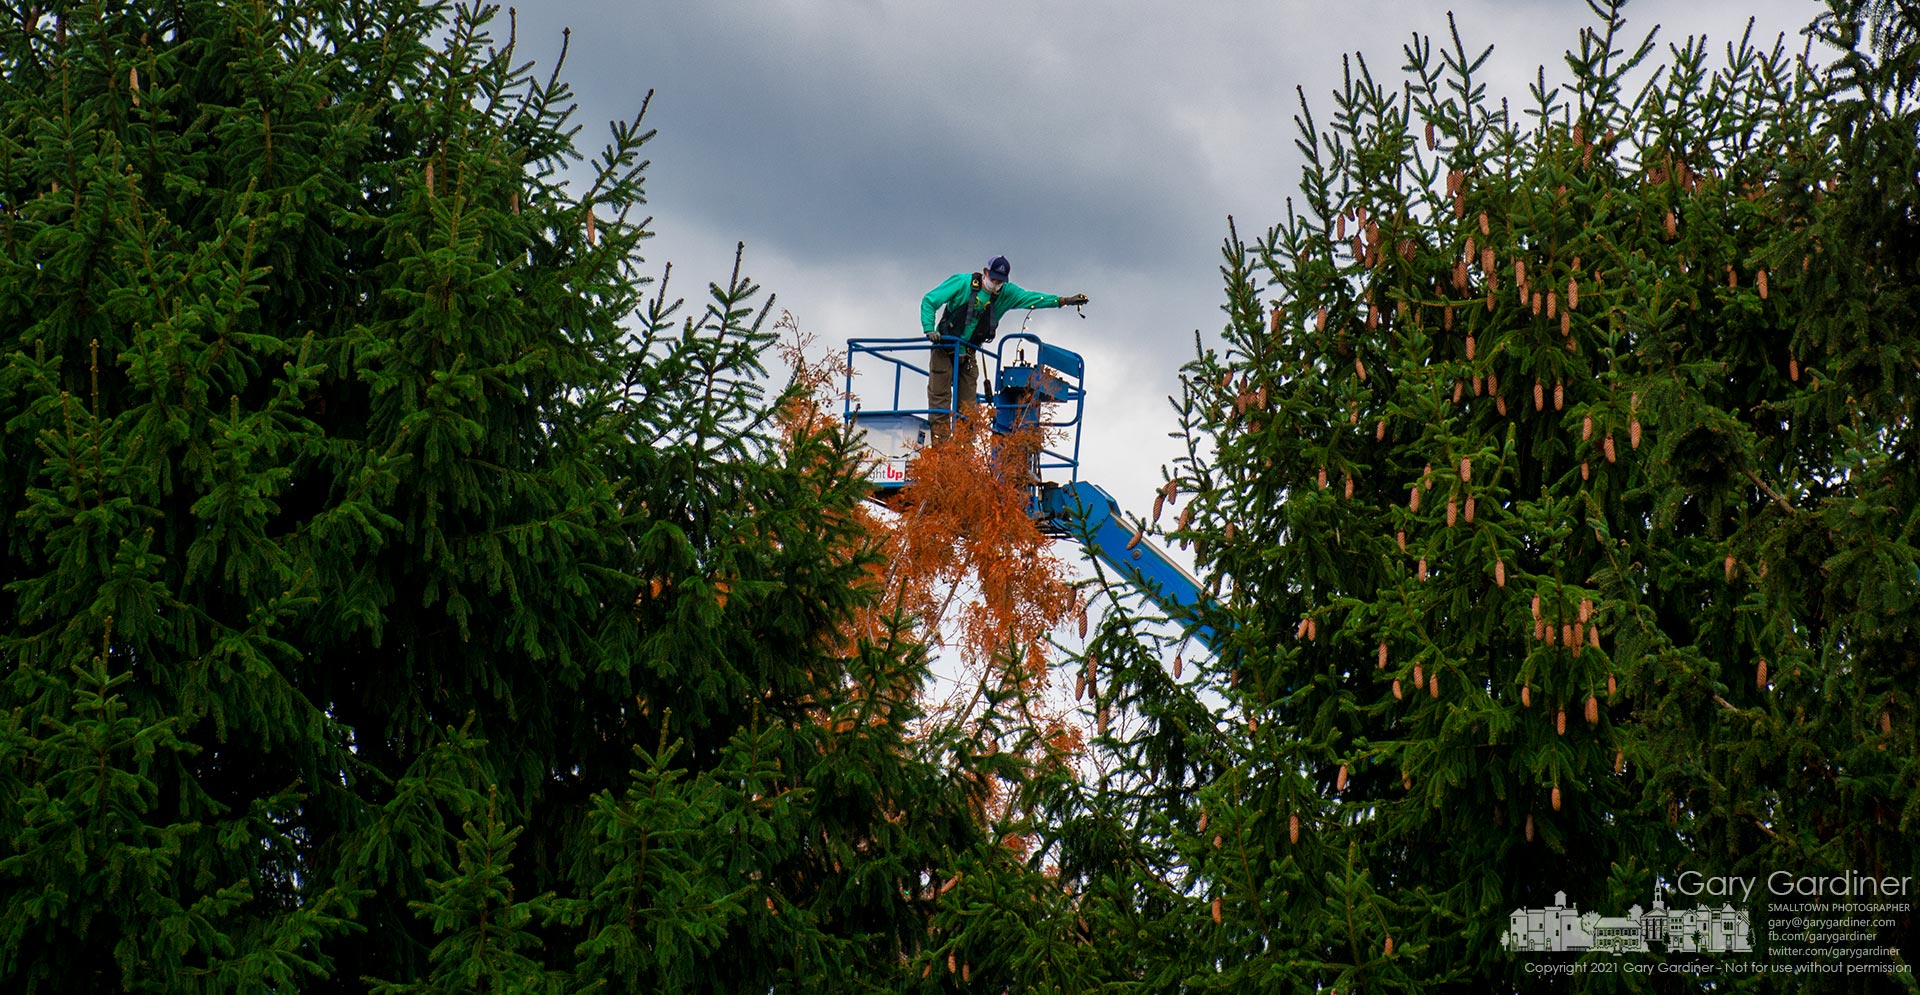 A Westerville Parks worker dangles strings of led lights before lowering them onto branches of a tree on the lawn at Heritage Park as the city prepares for the holiday season beginning after Thanksgiving. My Final Photo for Nov. 17, 2021.